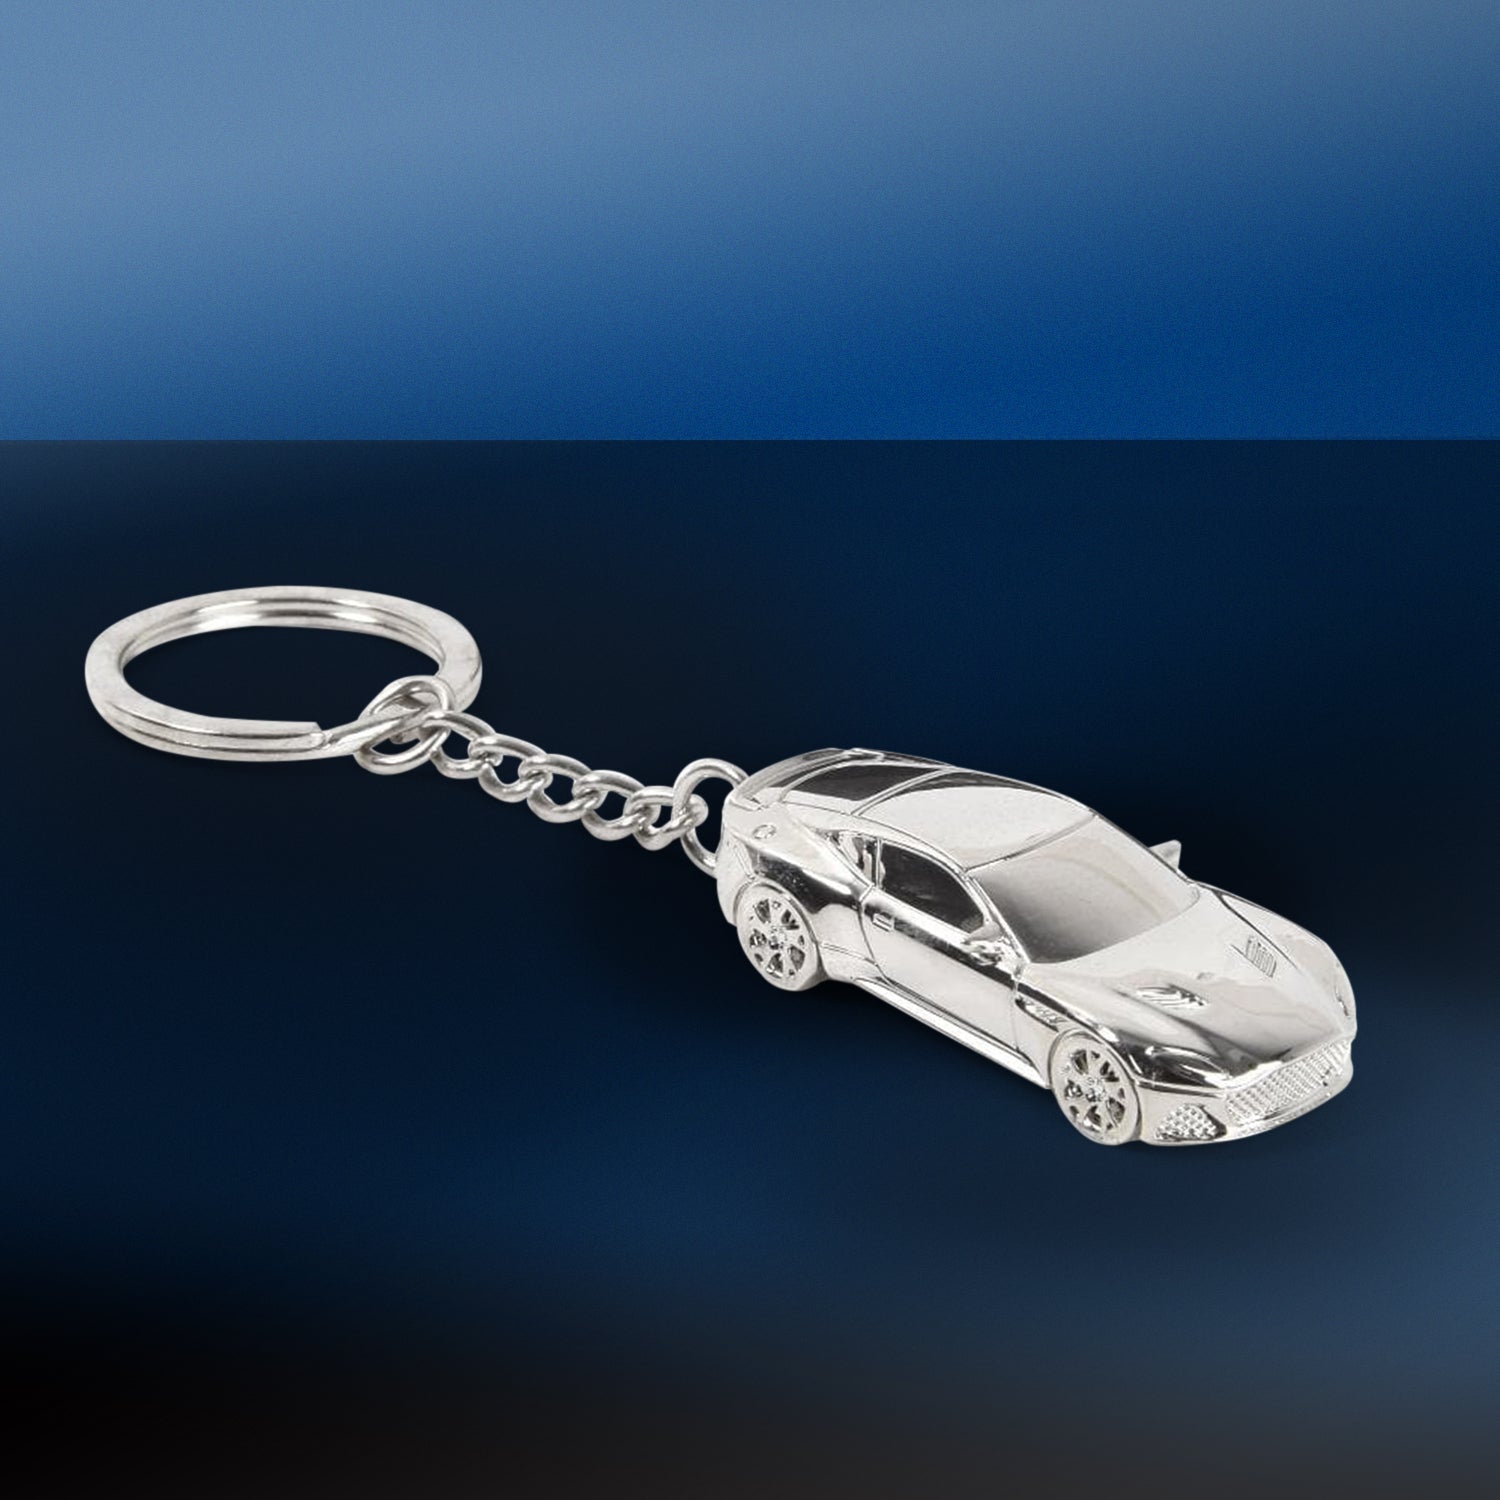 Automotive Key Fobs Chains Men Women Auto Tuning Parts Turbo Turbine  Keychains Metal Creative Gift Styling Key Ring Pendant Universal Interior  Accessories From Tinamao910607, $1.29 | DHgate.Com